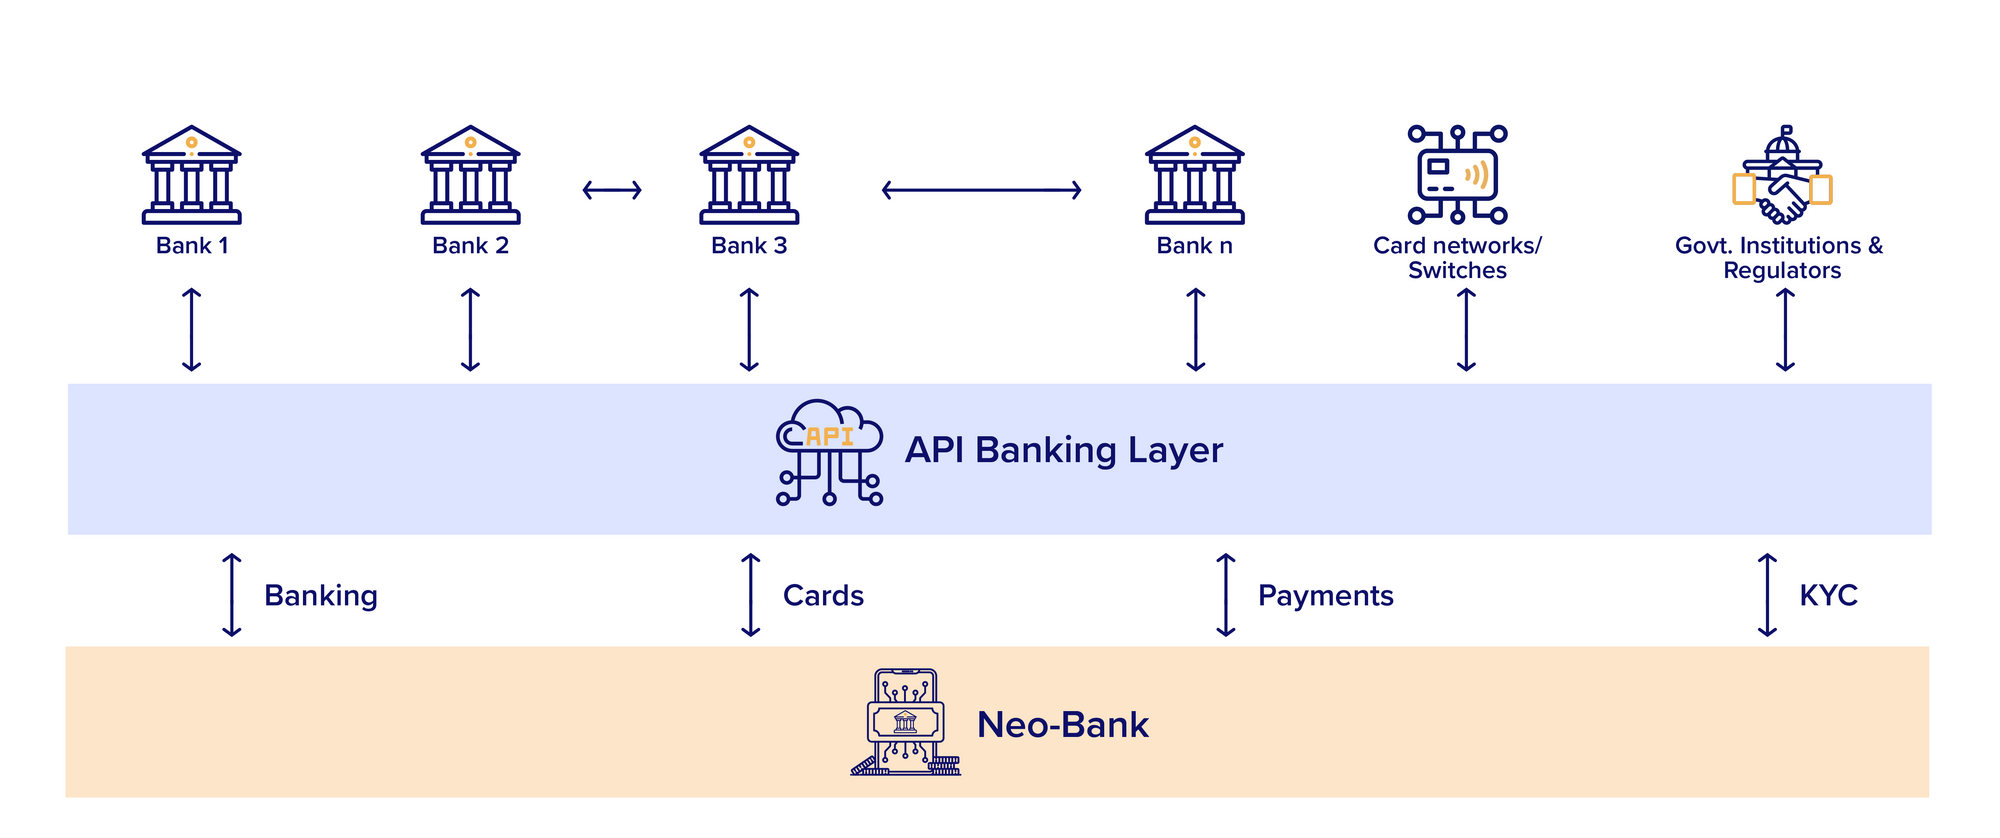 Neobanking in India: How APIs are paving the path for growth